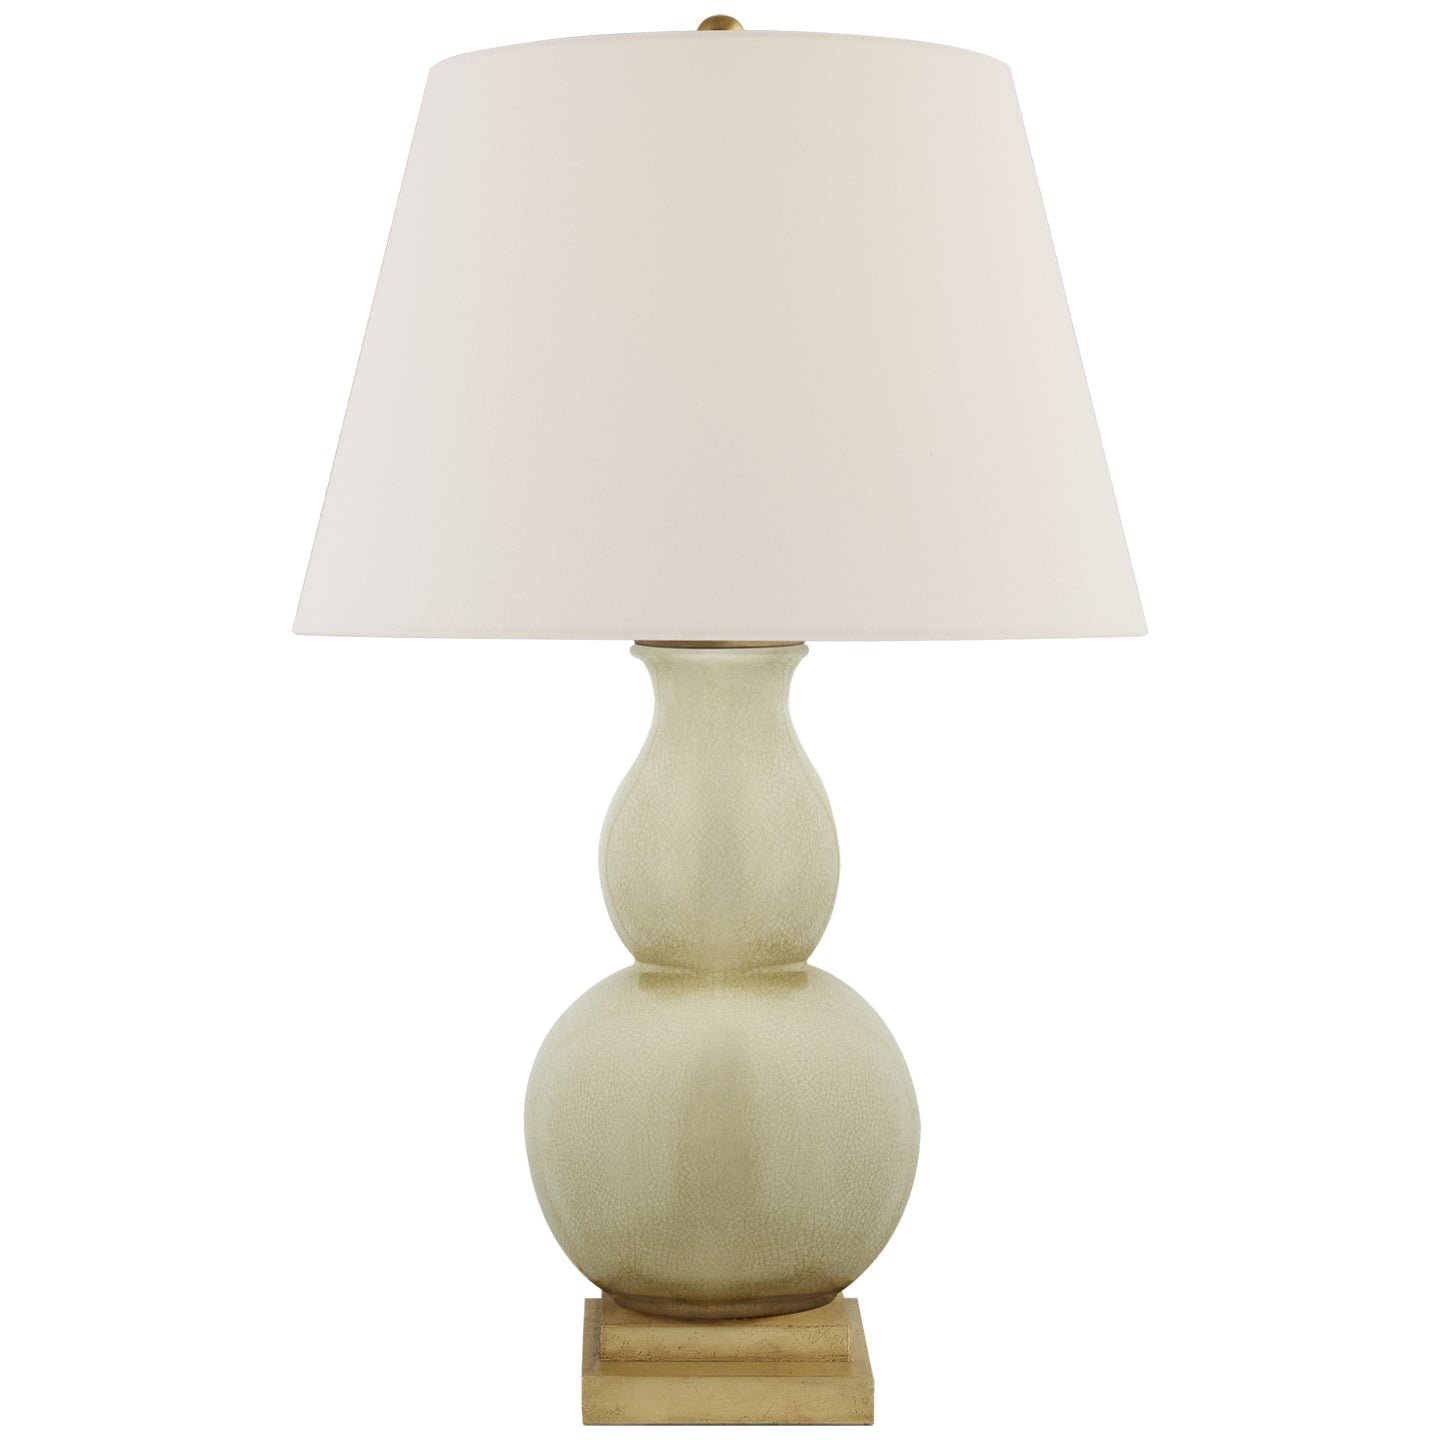 Visual Comfort Signature - CHA 8613TS-L - One Light Table Lamp - Gourd Form - Tea Stain Crackle